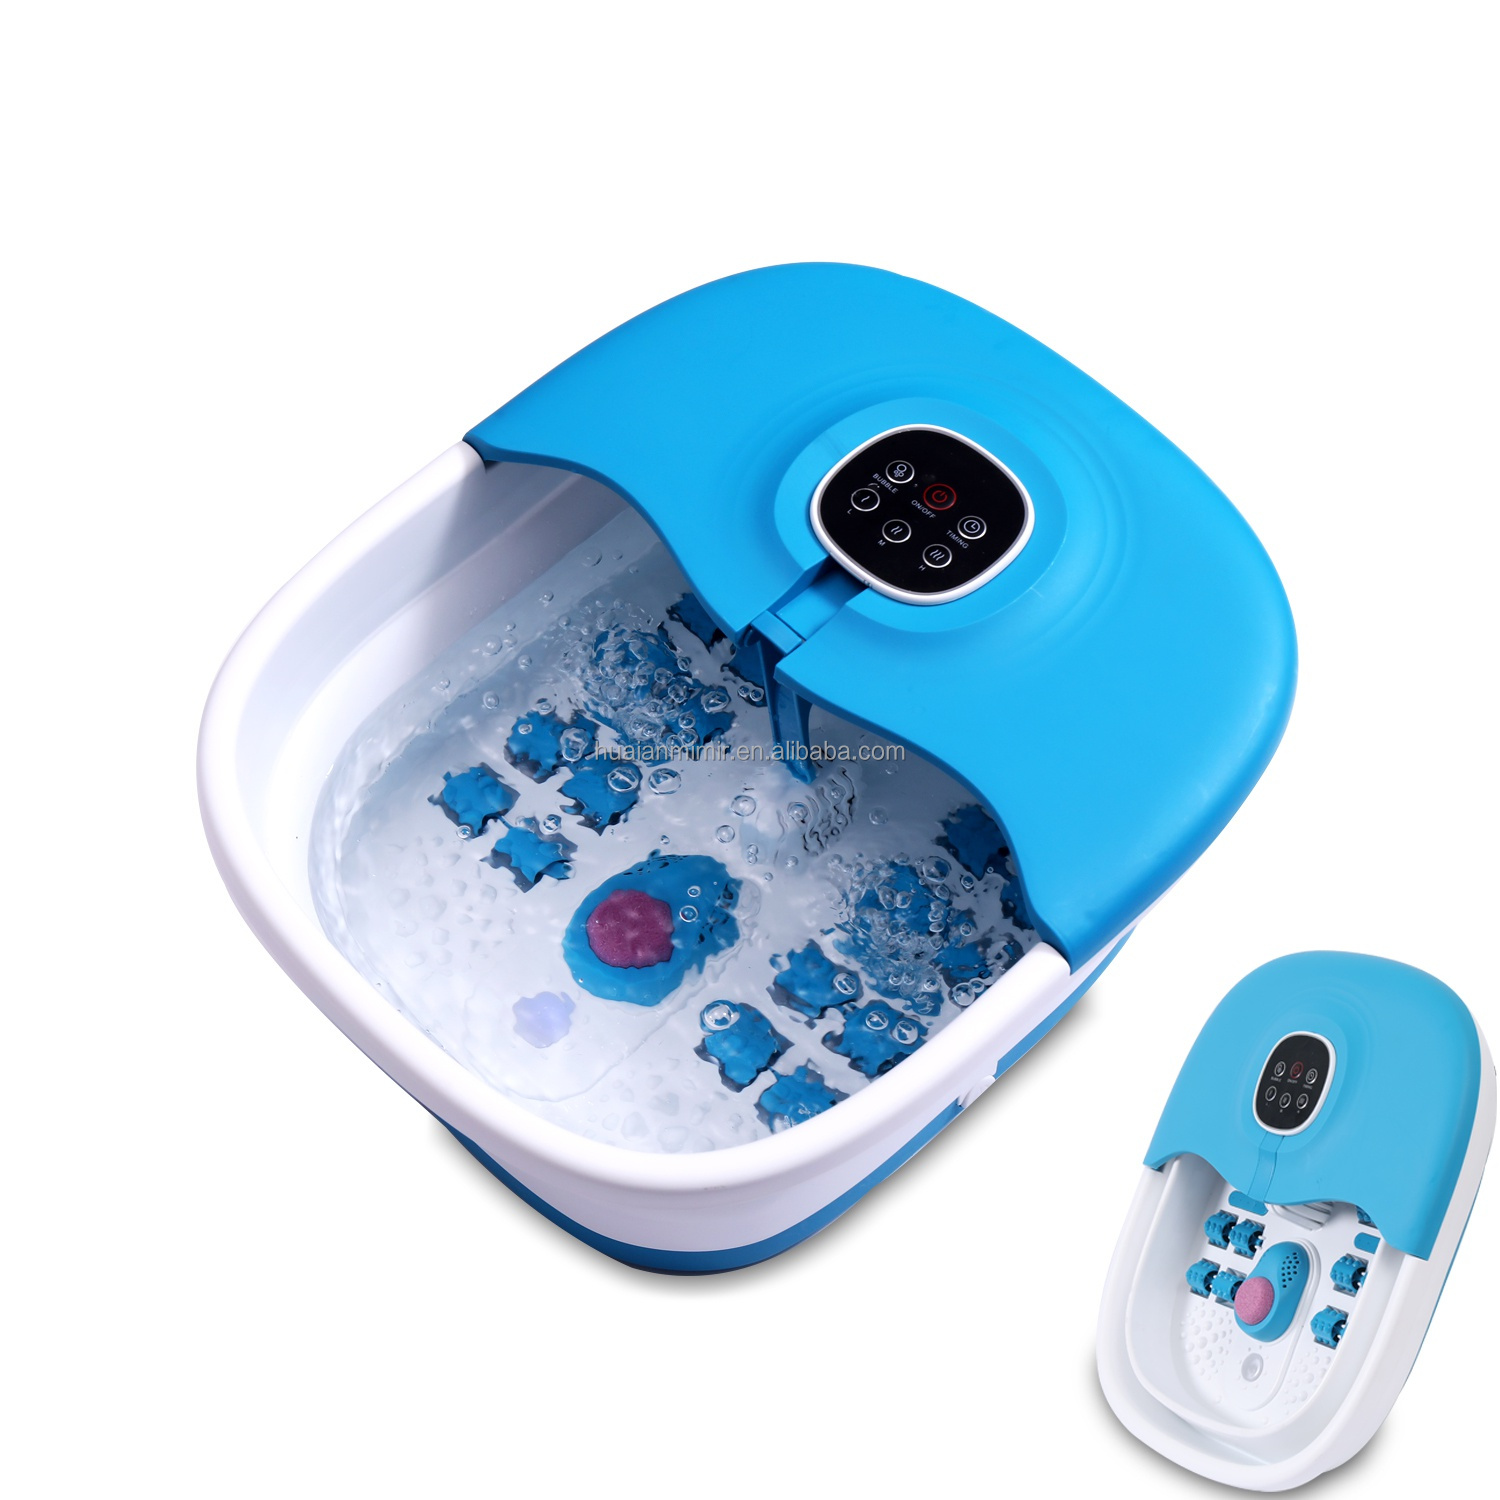 Collapsible Foot Spa Massager Function Display